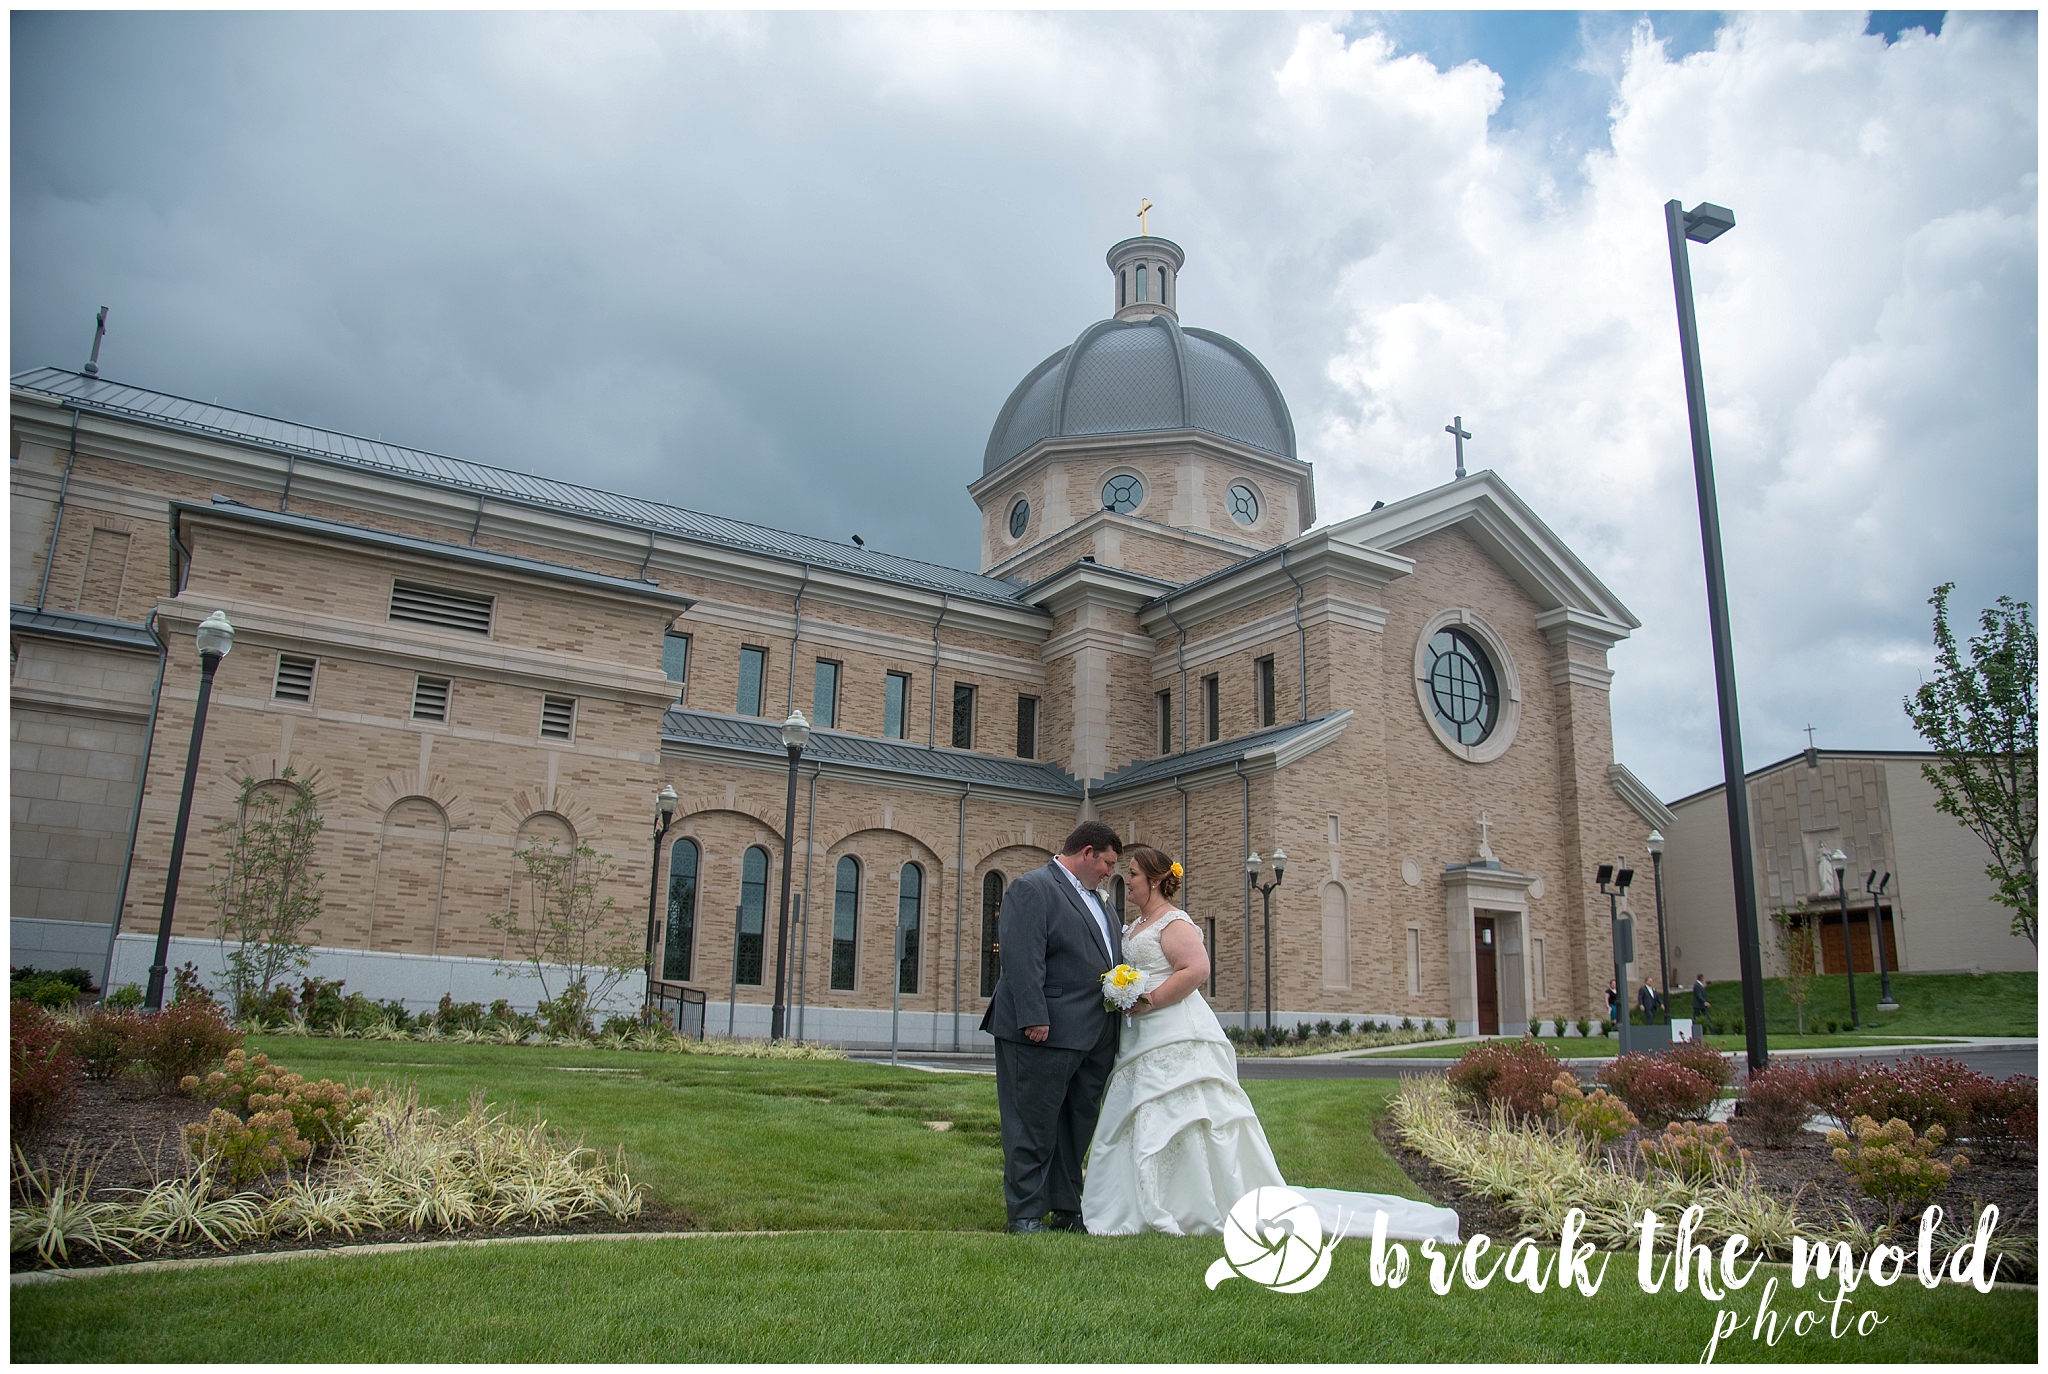 wedding-knoxville-sacred-heart-cathedral-photographer-break-the-mold-photo-feature-affordable_0809.jpg